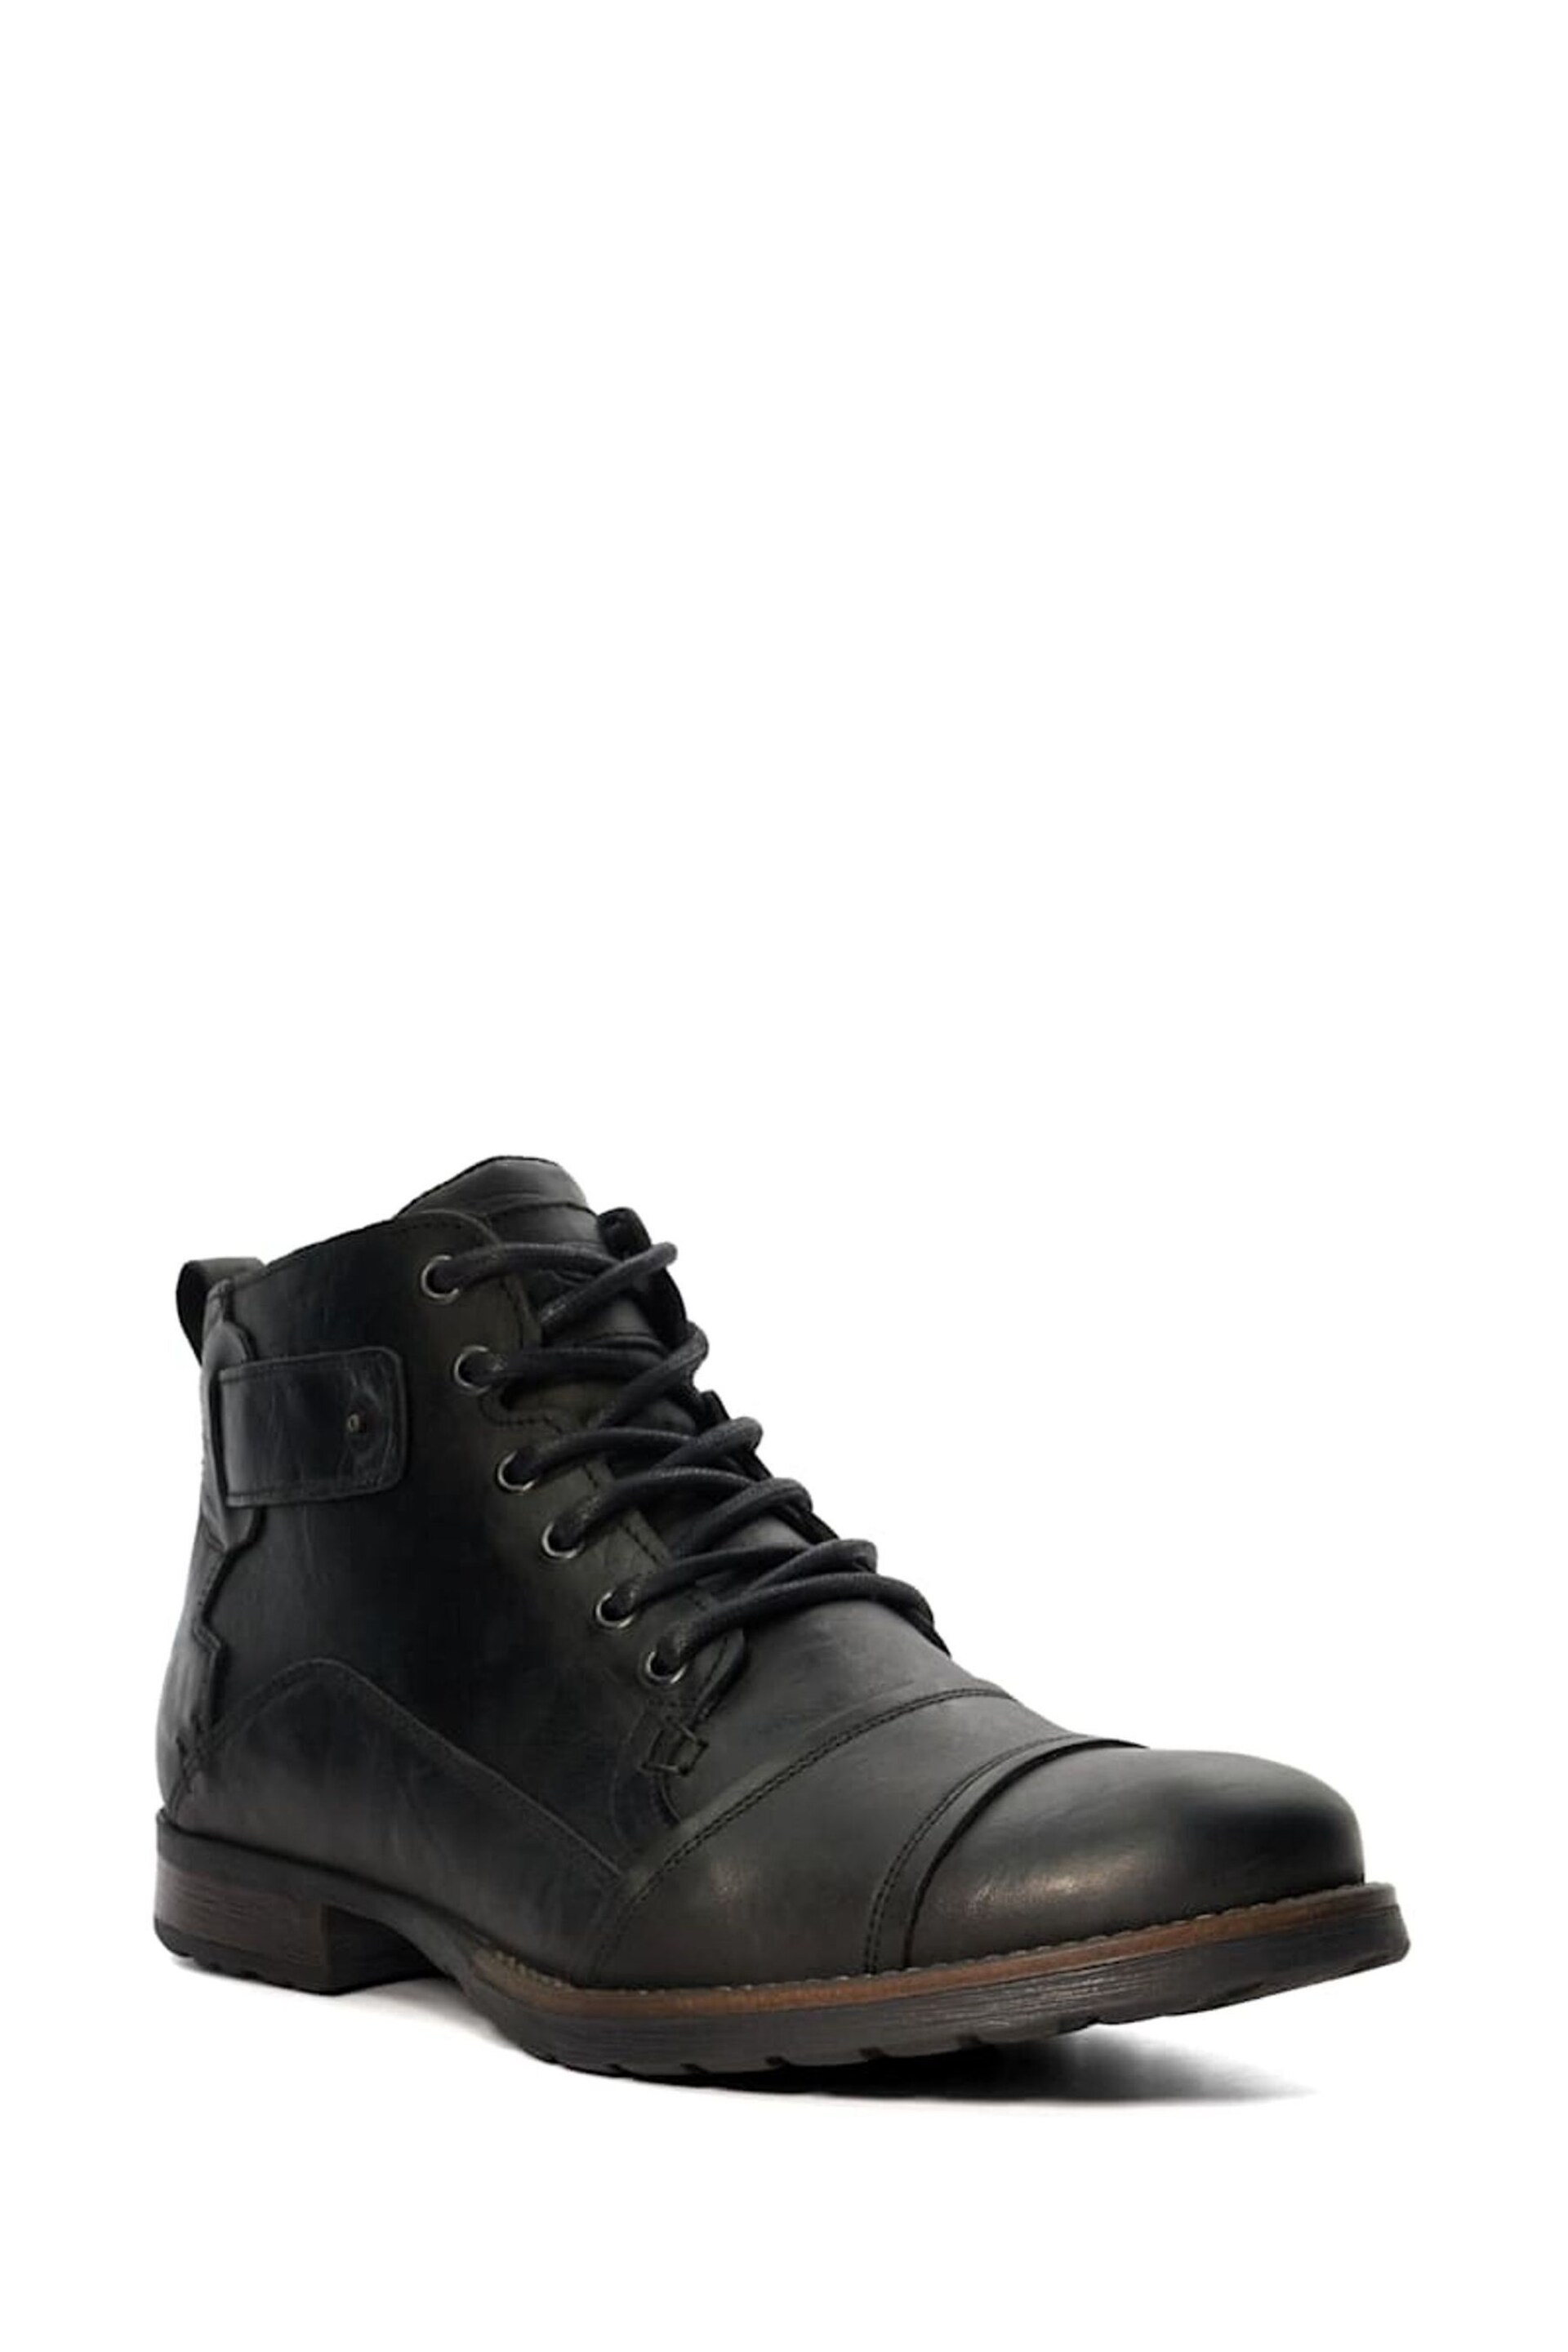 Dune London Black Heavy Duty Leather Simon Ankle Boots - Image 6 of 8